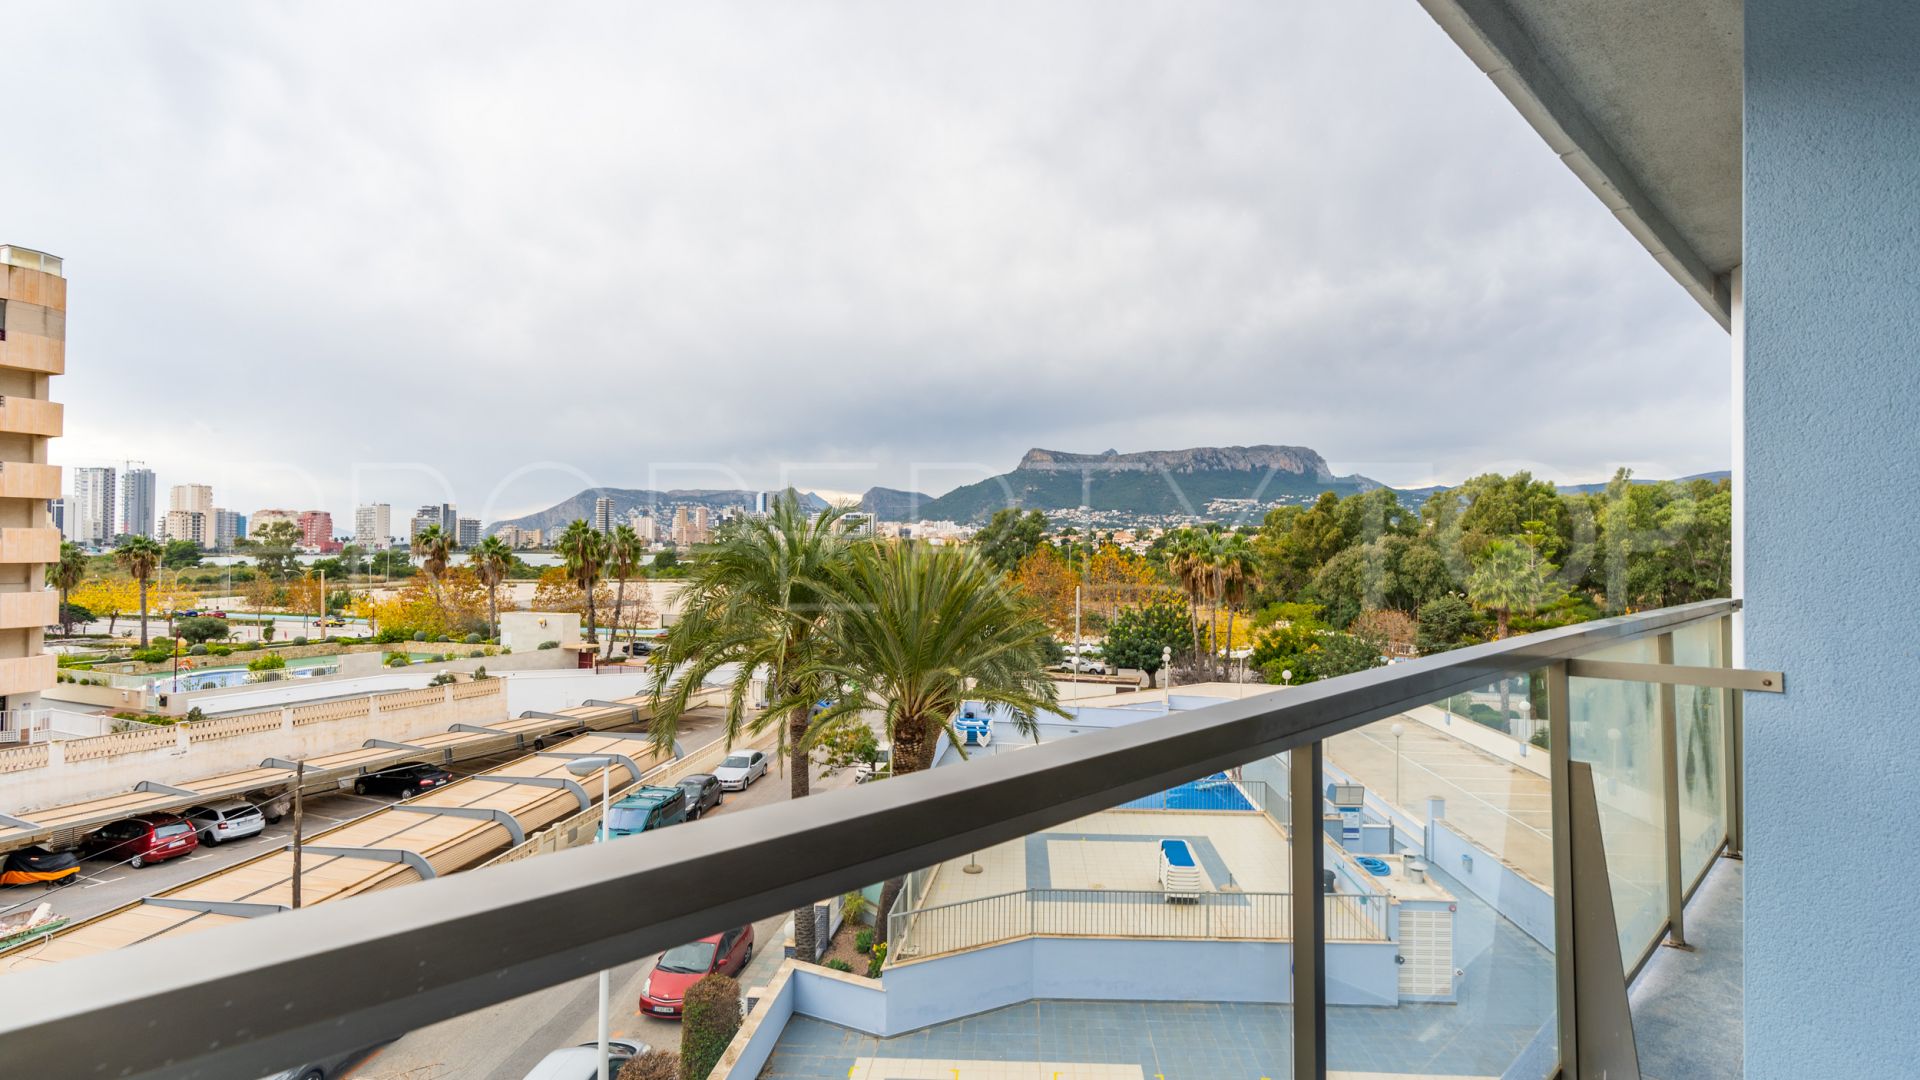 2 bedrooms apartment in Calpe for sale